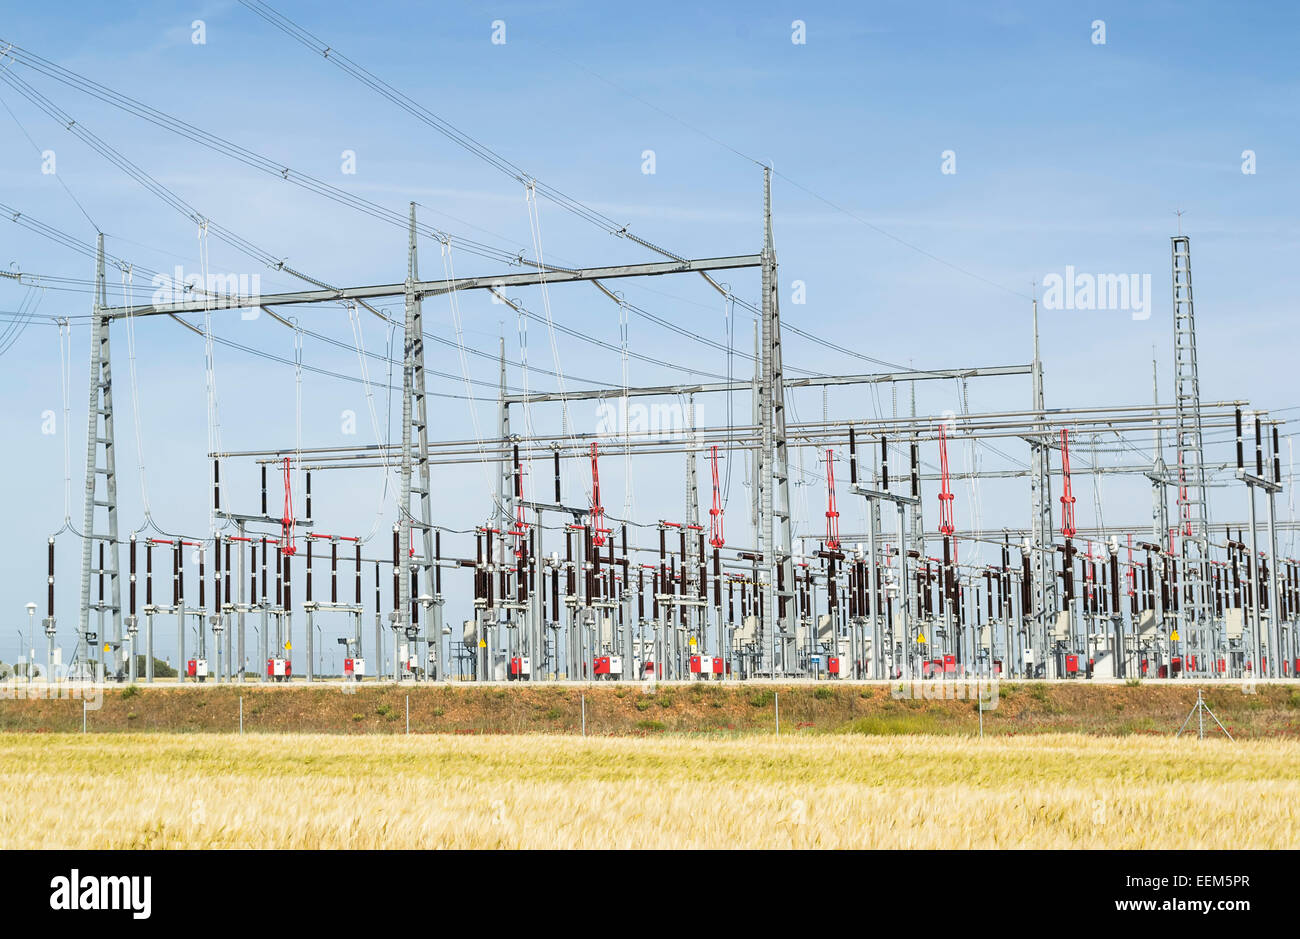 Electrical equipment of a power station elevated above a wheat field Stock Photo